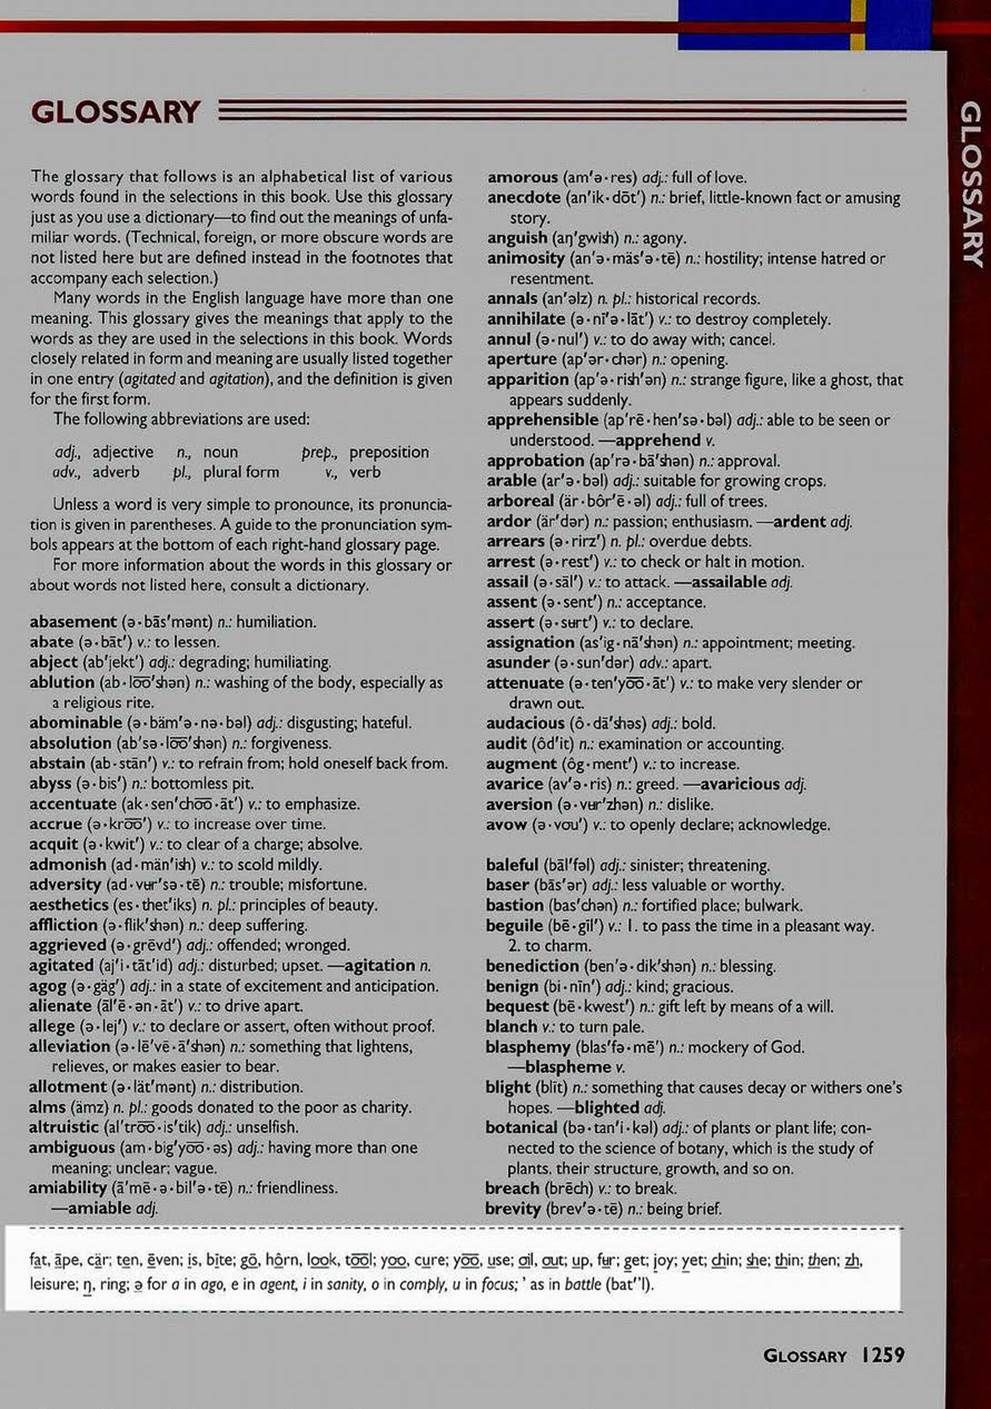 Pronunciation key at bottom of page in glossary (print only)